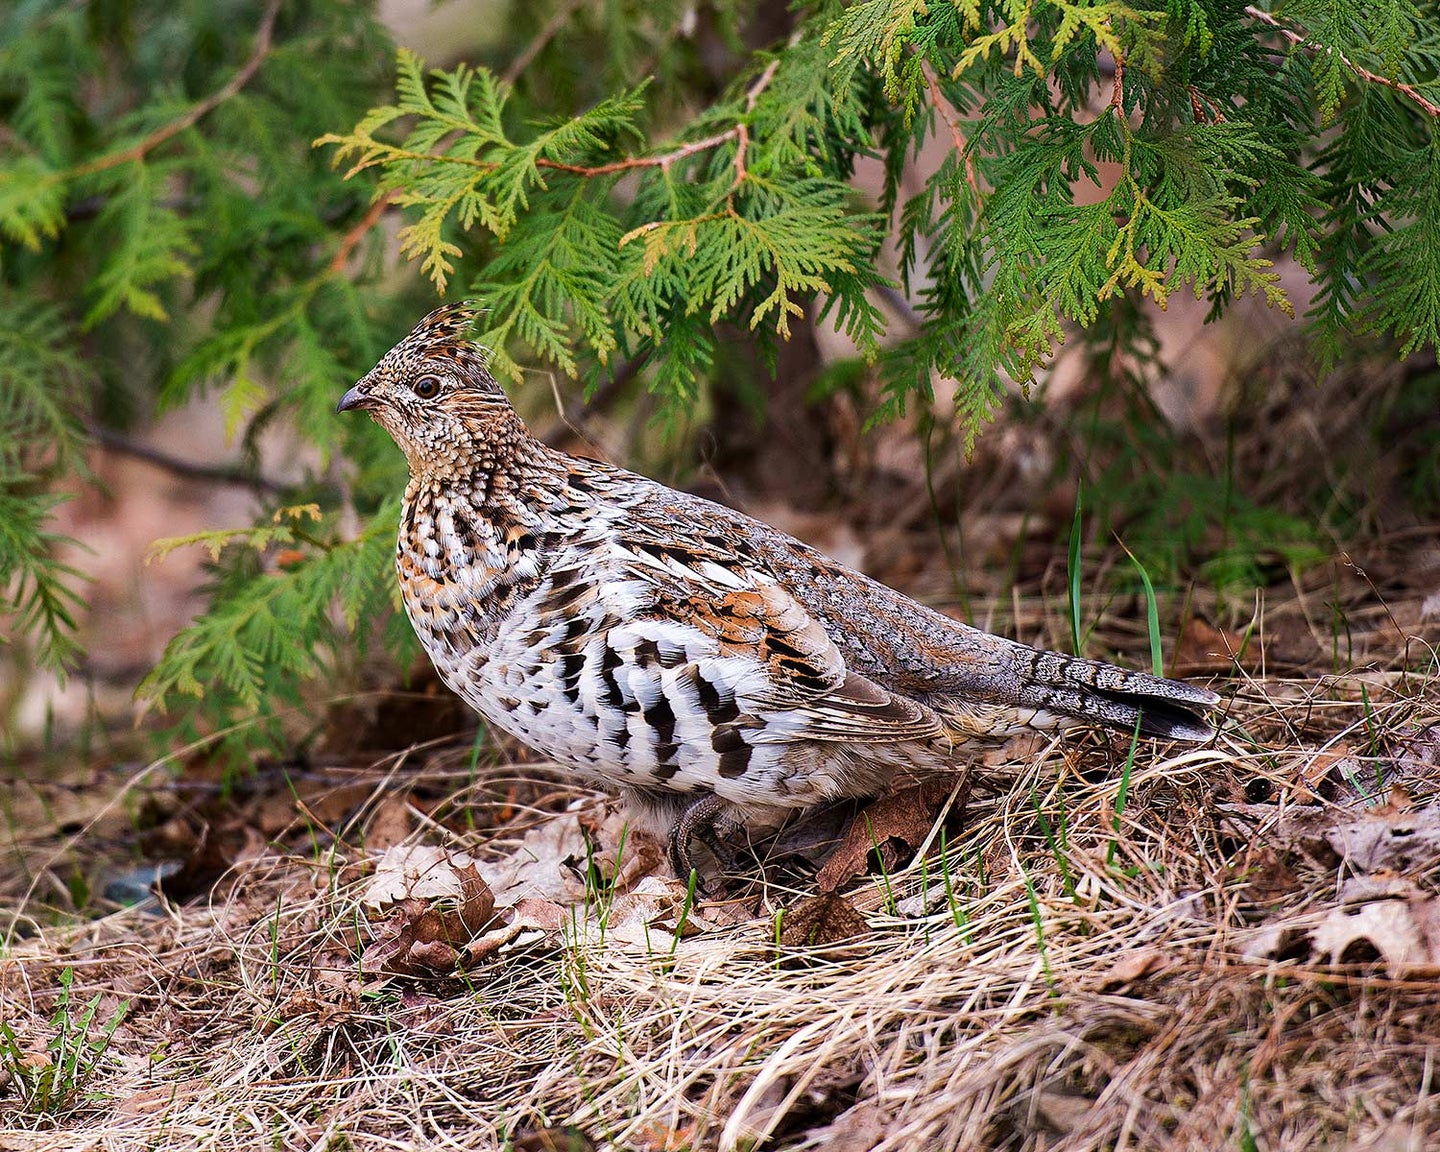 A ruffed grouse on the ground next to a bush.